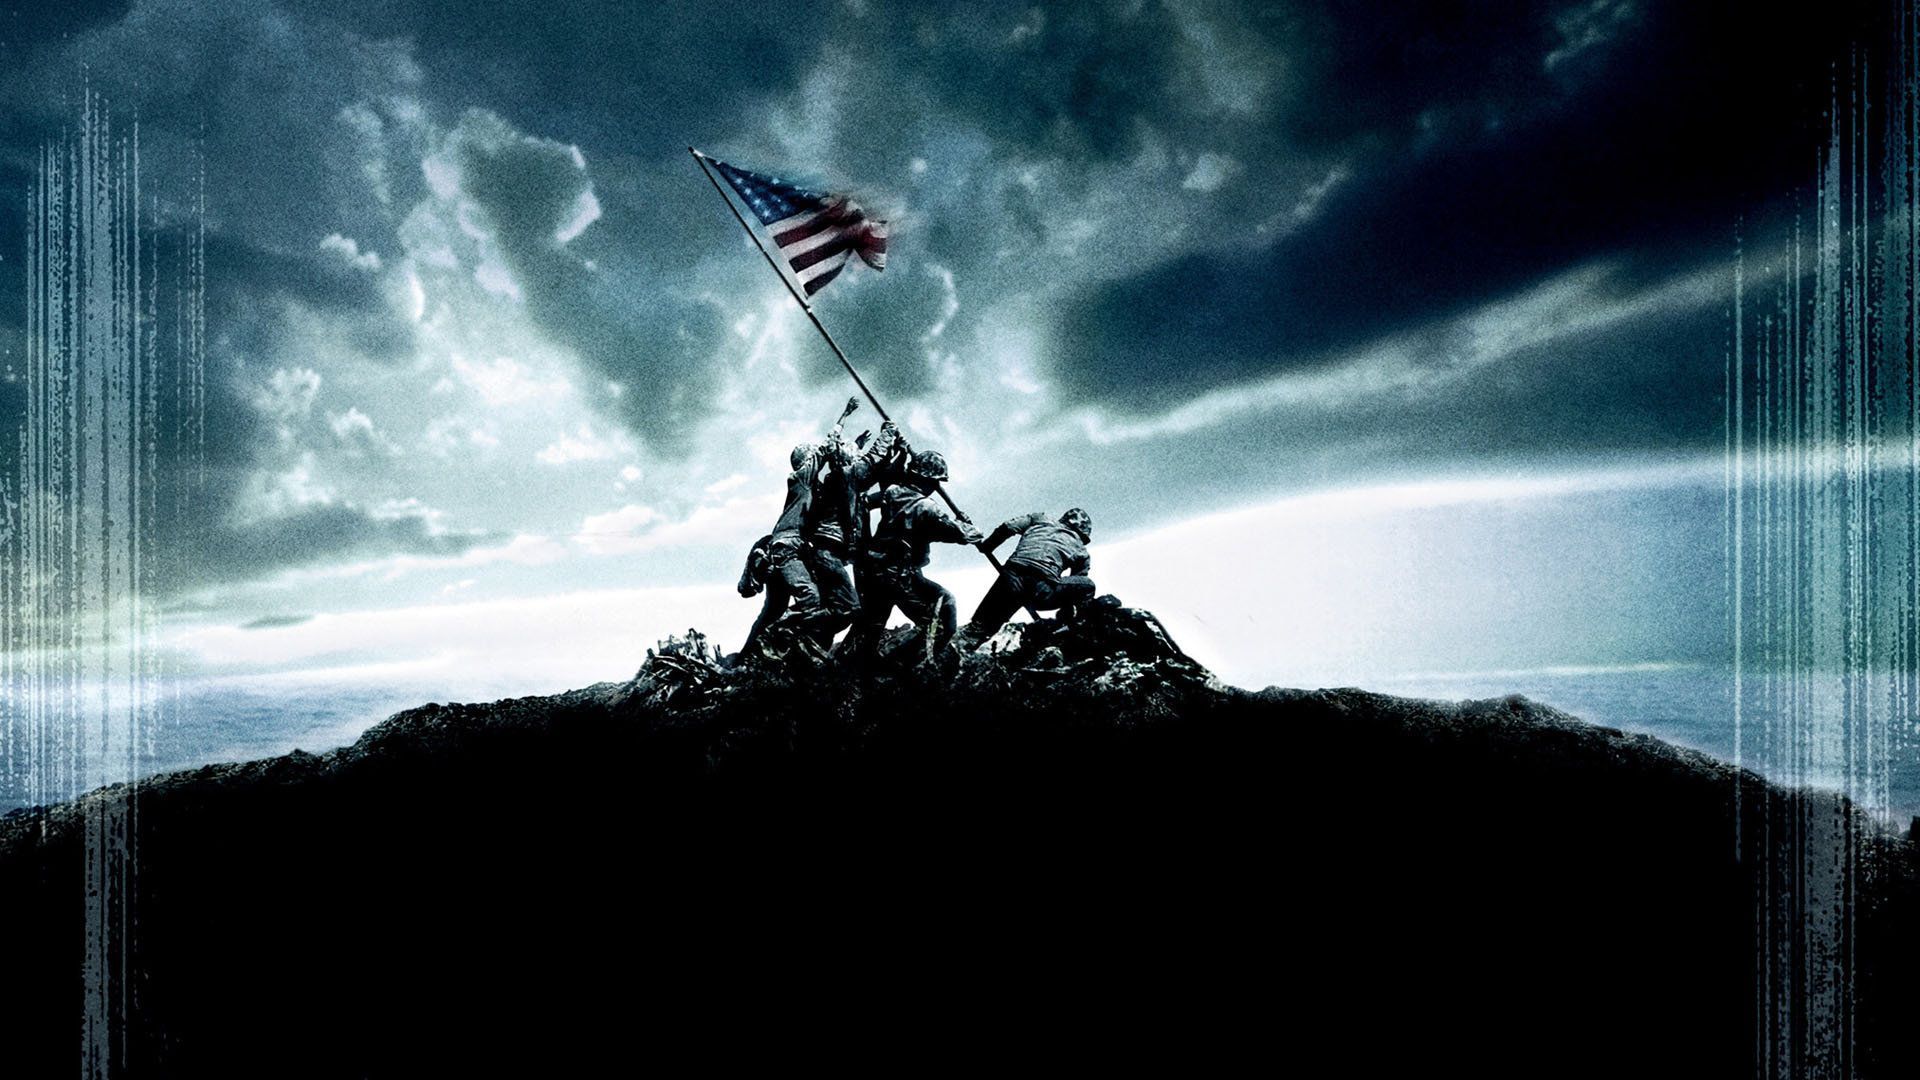 Free download Union Films Review Flags of Our Fathers [1920x1080] for your Desktop, Mobile & Tablet. Explore Us Army Desktop Wallpaper. Free Military Wallpaper, Free Military Wallpaper